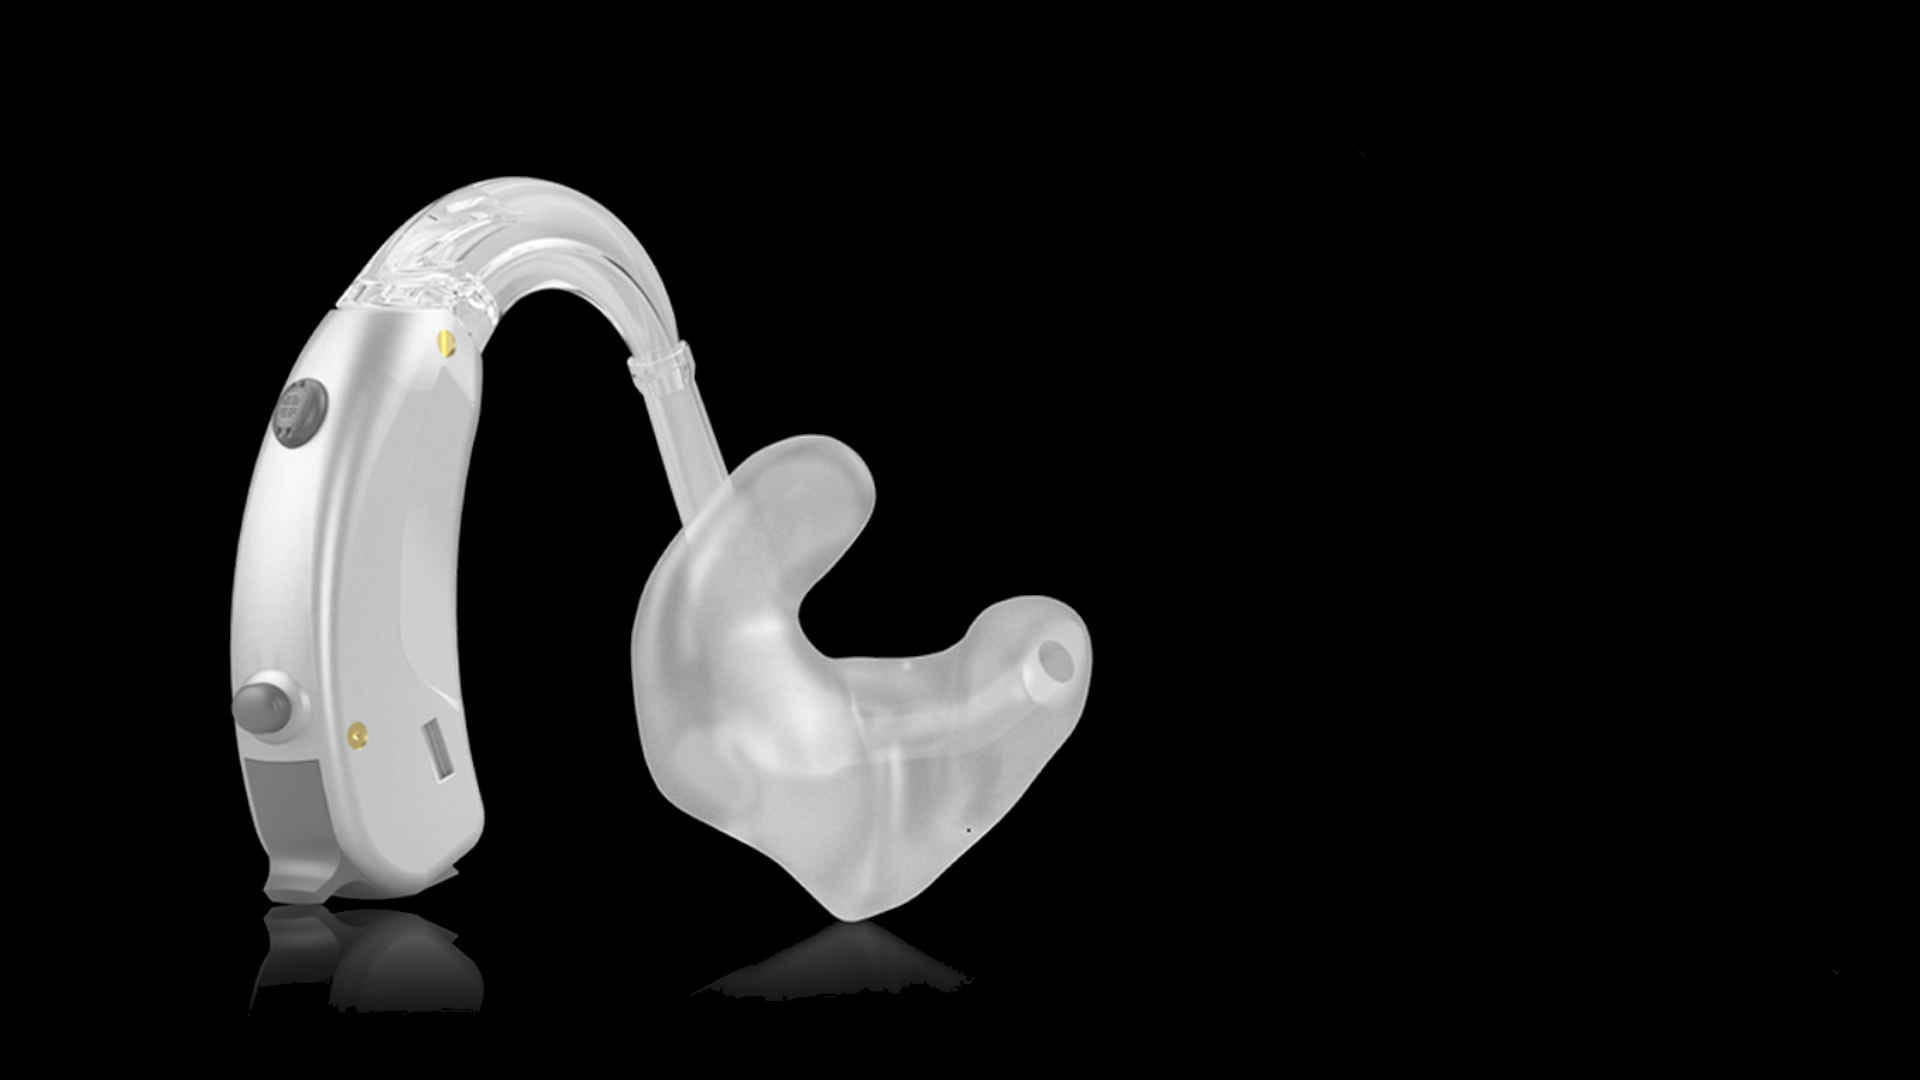 Widex hearing aid with earmould